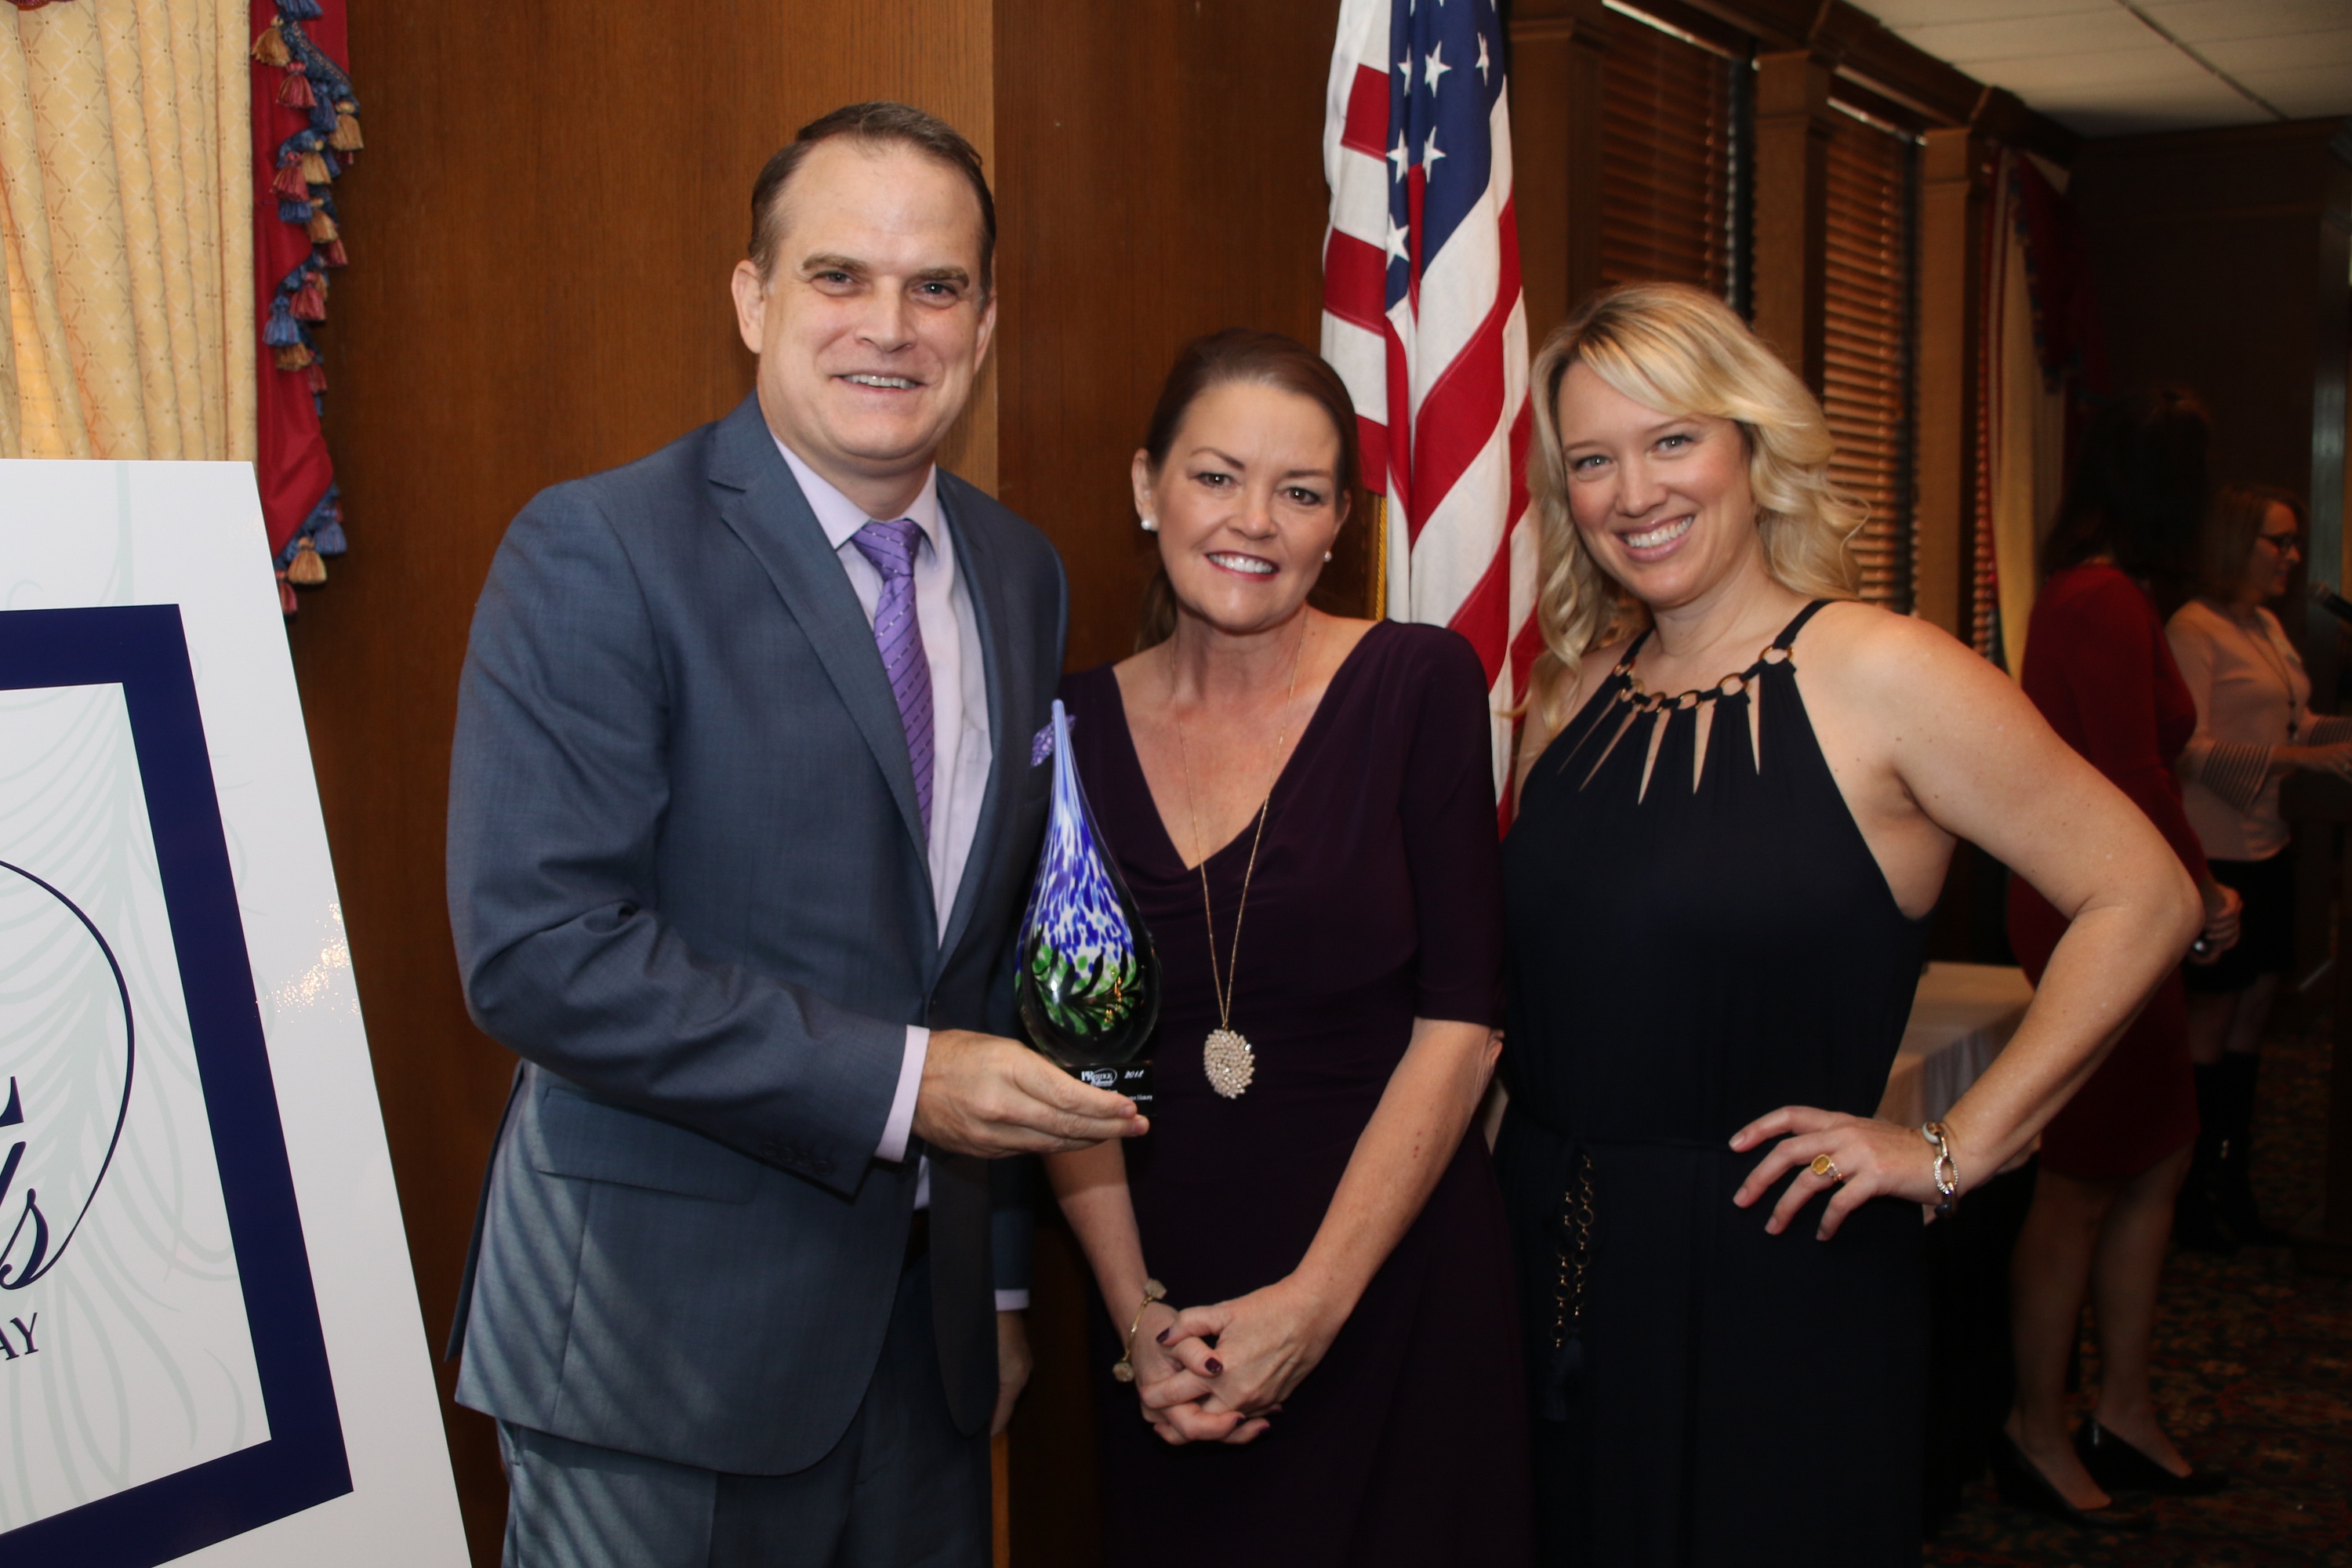 (L to R) PRmediaNow's Colin Trethewey and Coleen Murphy accept PRSA PRestige Awards for X Suit & Nise Wave campaigns, along with keynote speaker, Honeyfund co-founder/Shark Tank victor Sara Margulis.